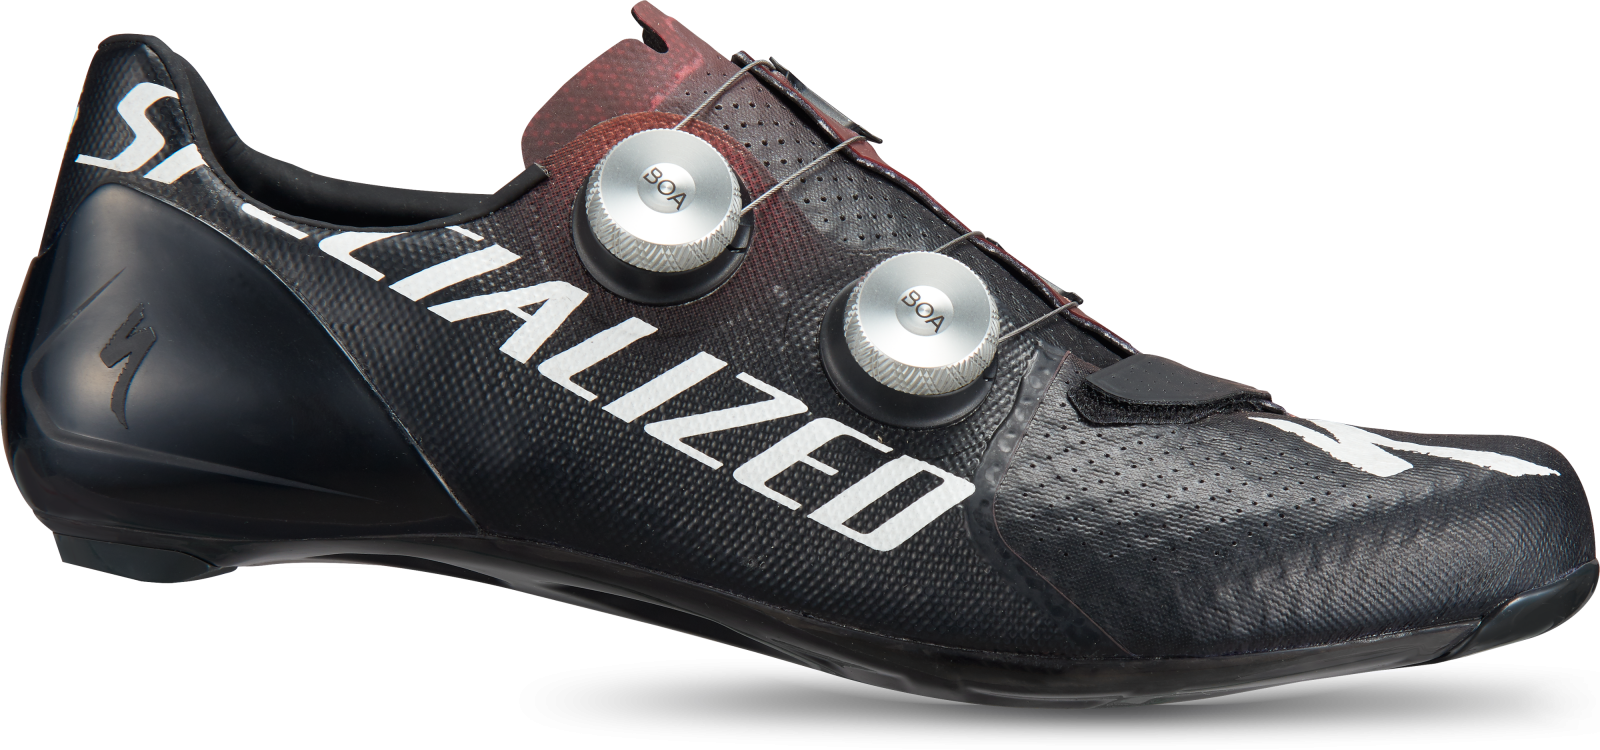 SW 7 RD SHOE SPEED OF LIGHT LTD 43 limited edition Specialized